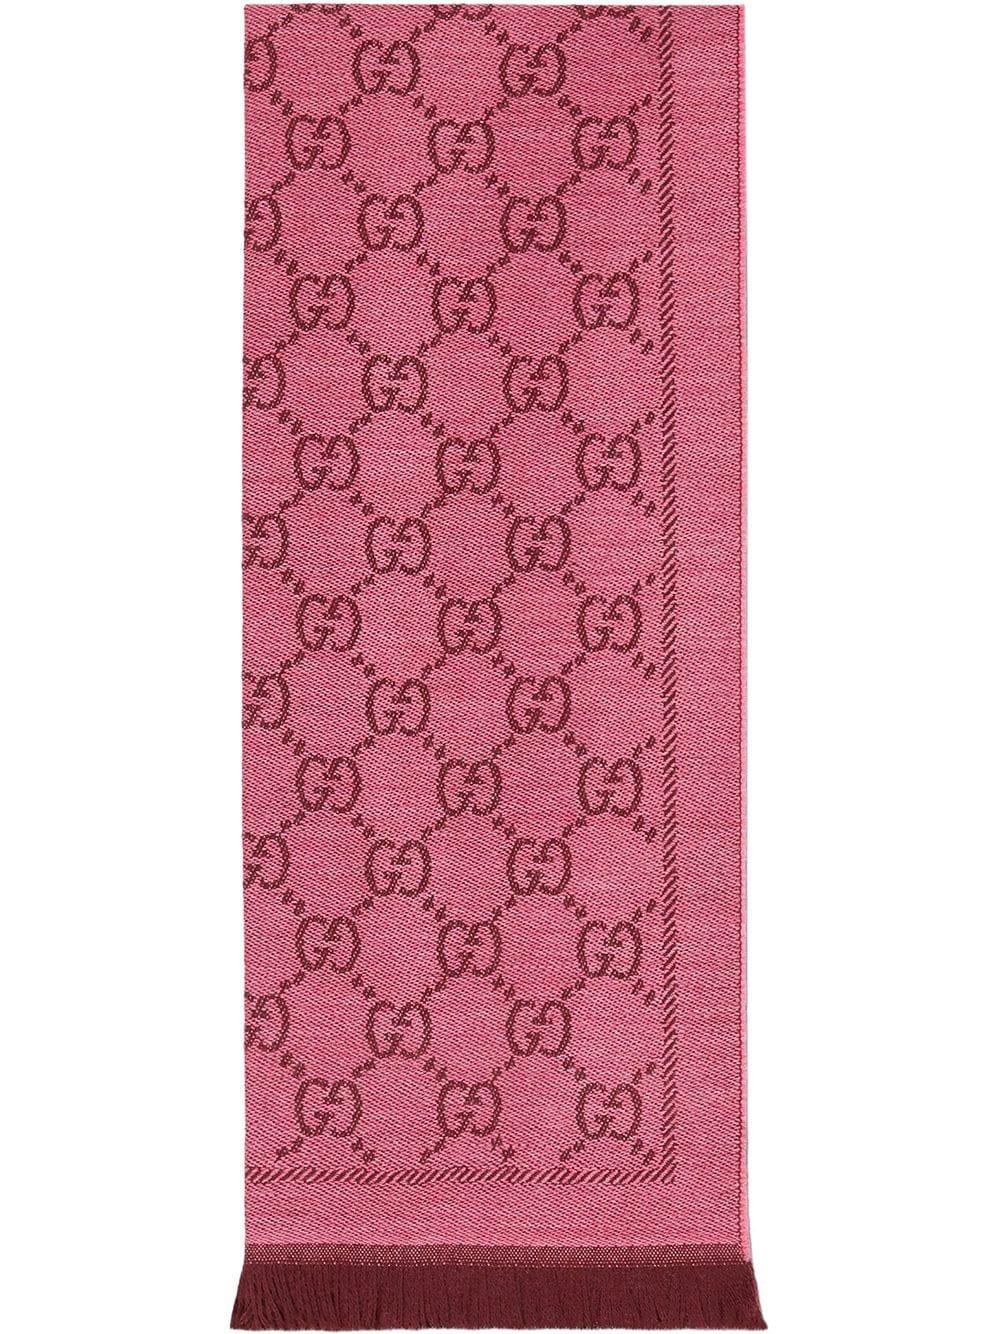 Gucci Wool GG Jacquard Pattern Knitted Scarf in Pink - Lyst